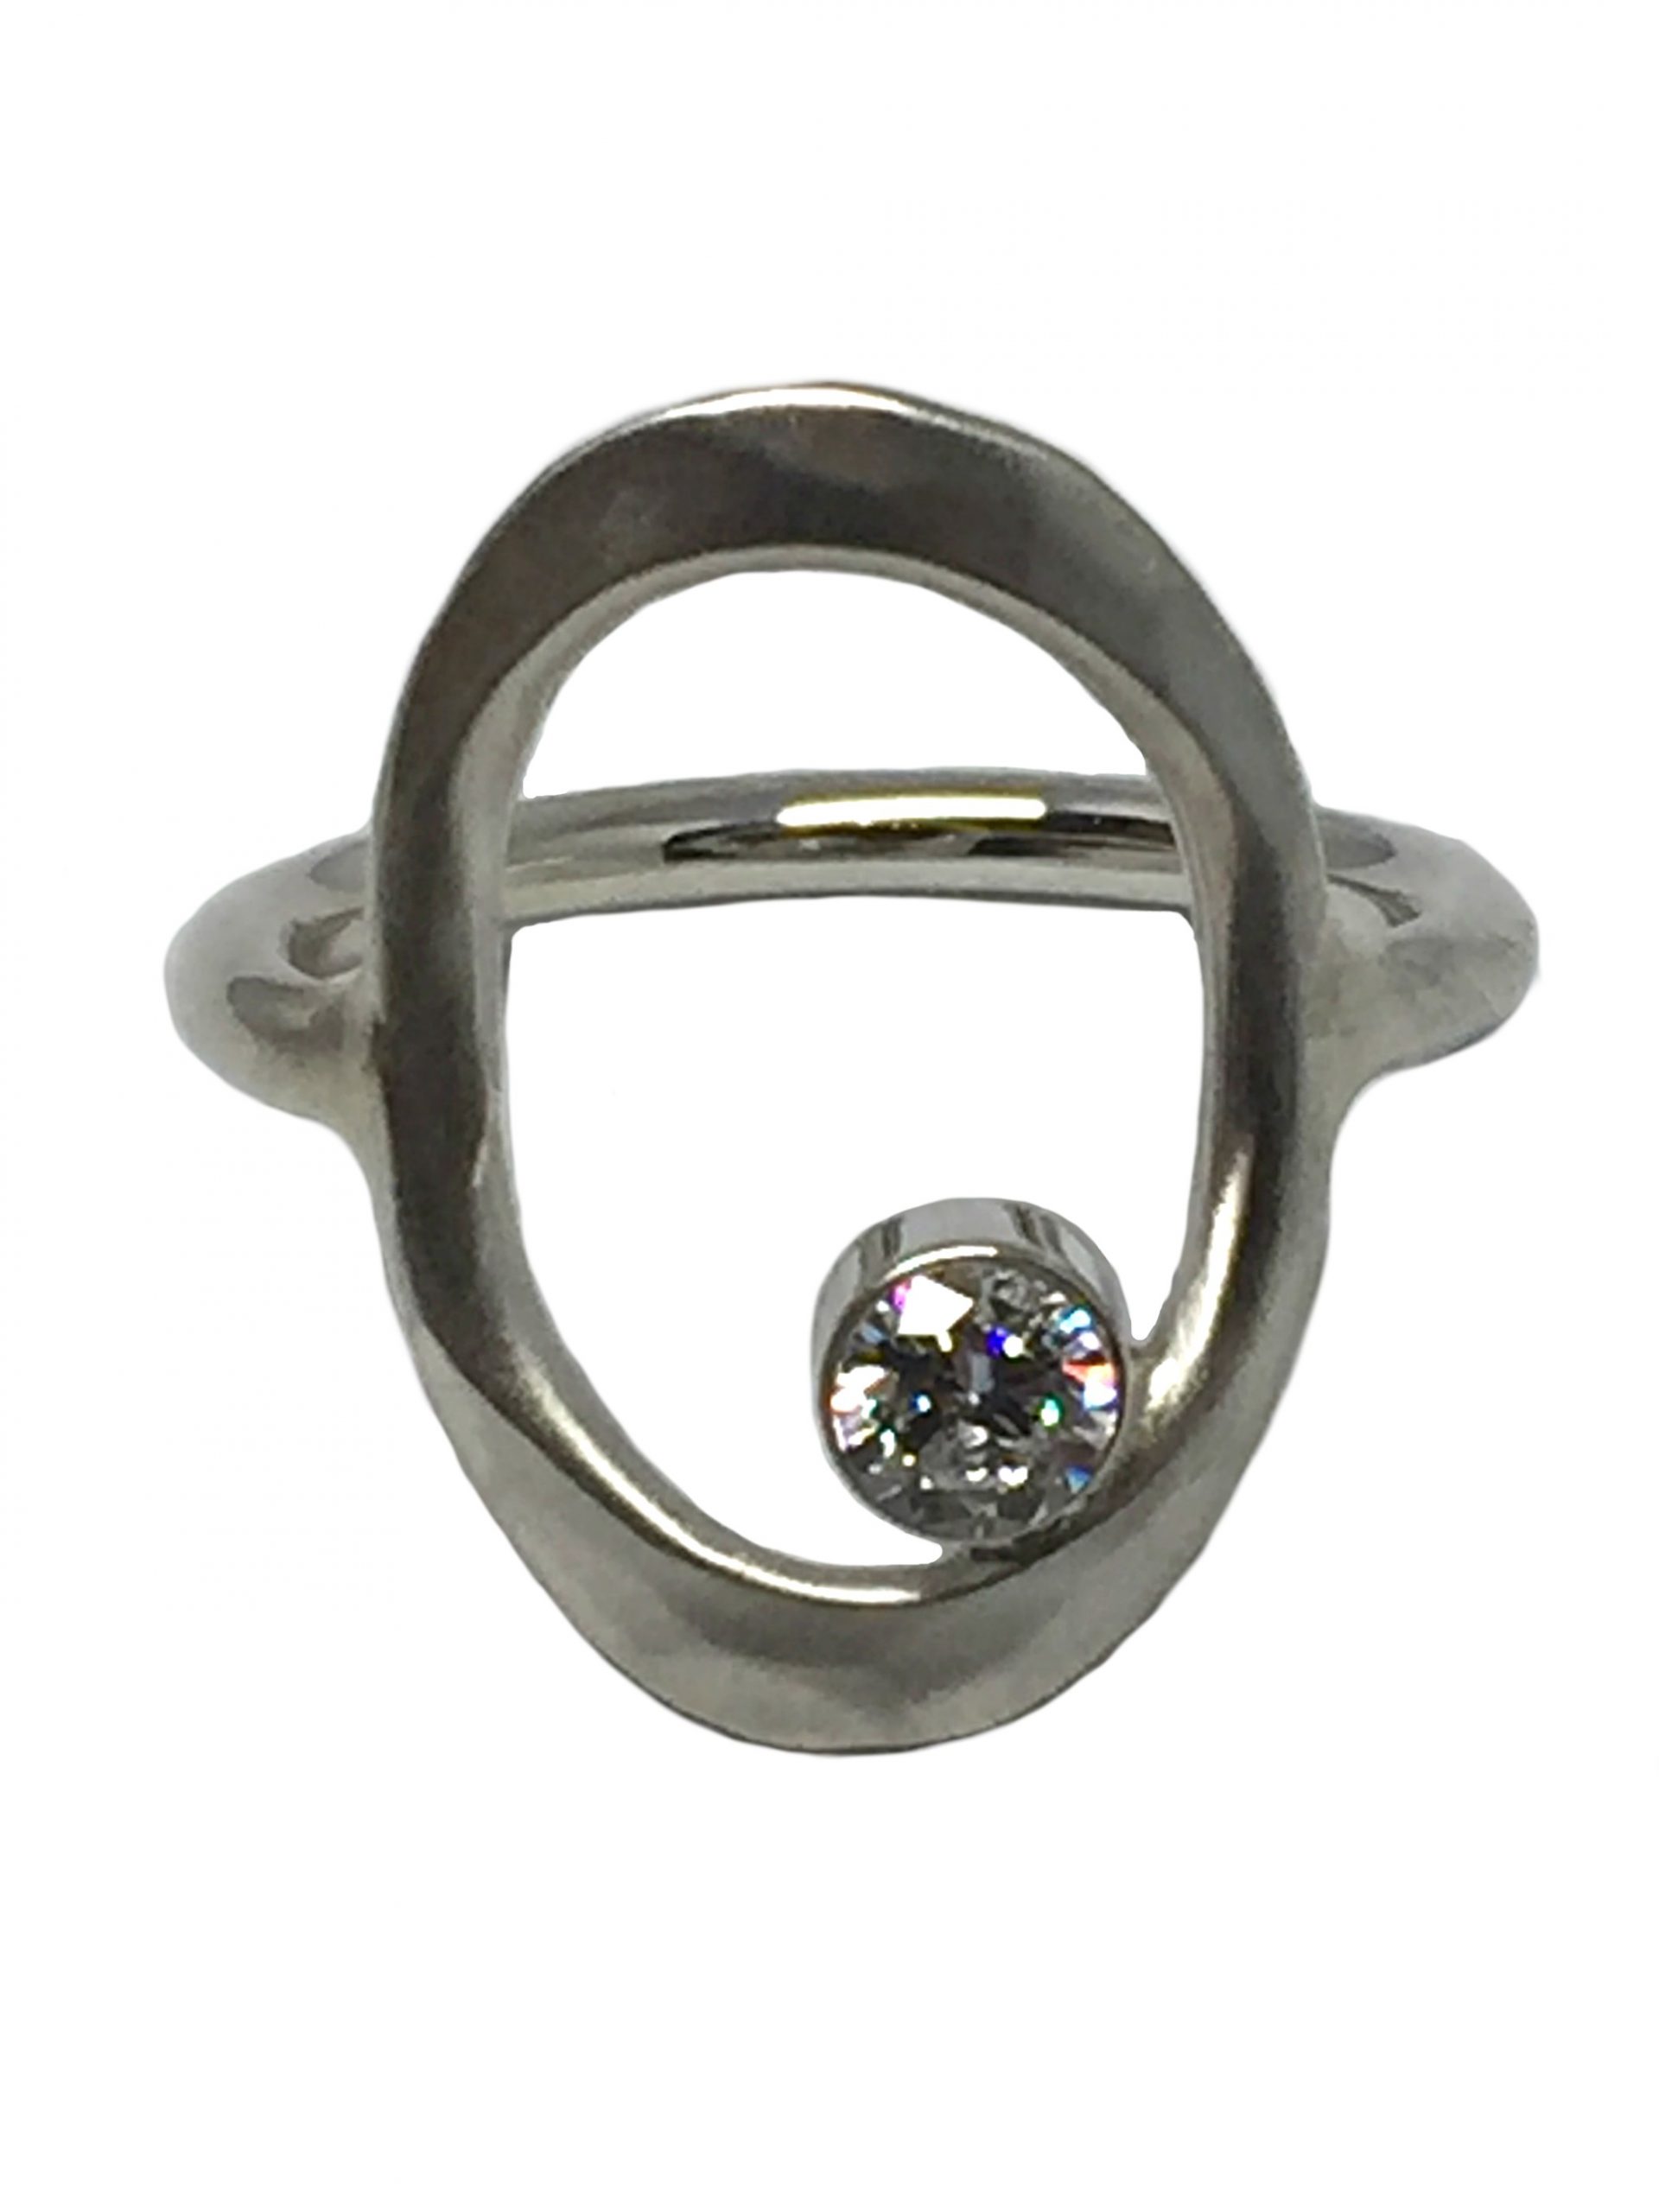 Sterling Silver and CZ Ring by Karyn Chopik | Effusion Art Gallery + Cast Glass Studio, Invermere BC